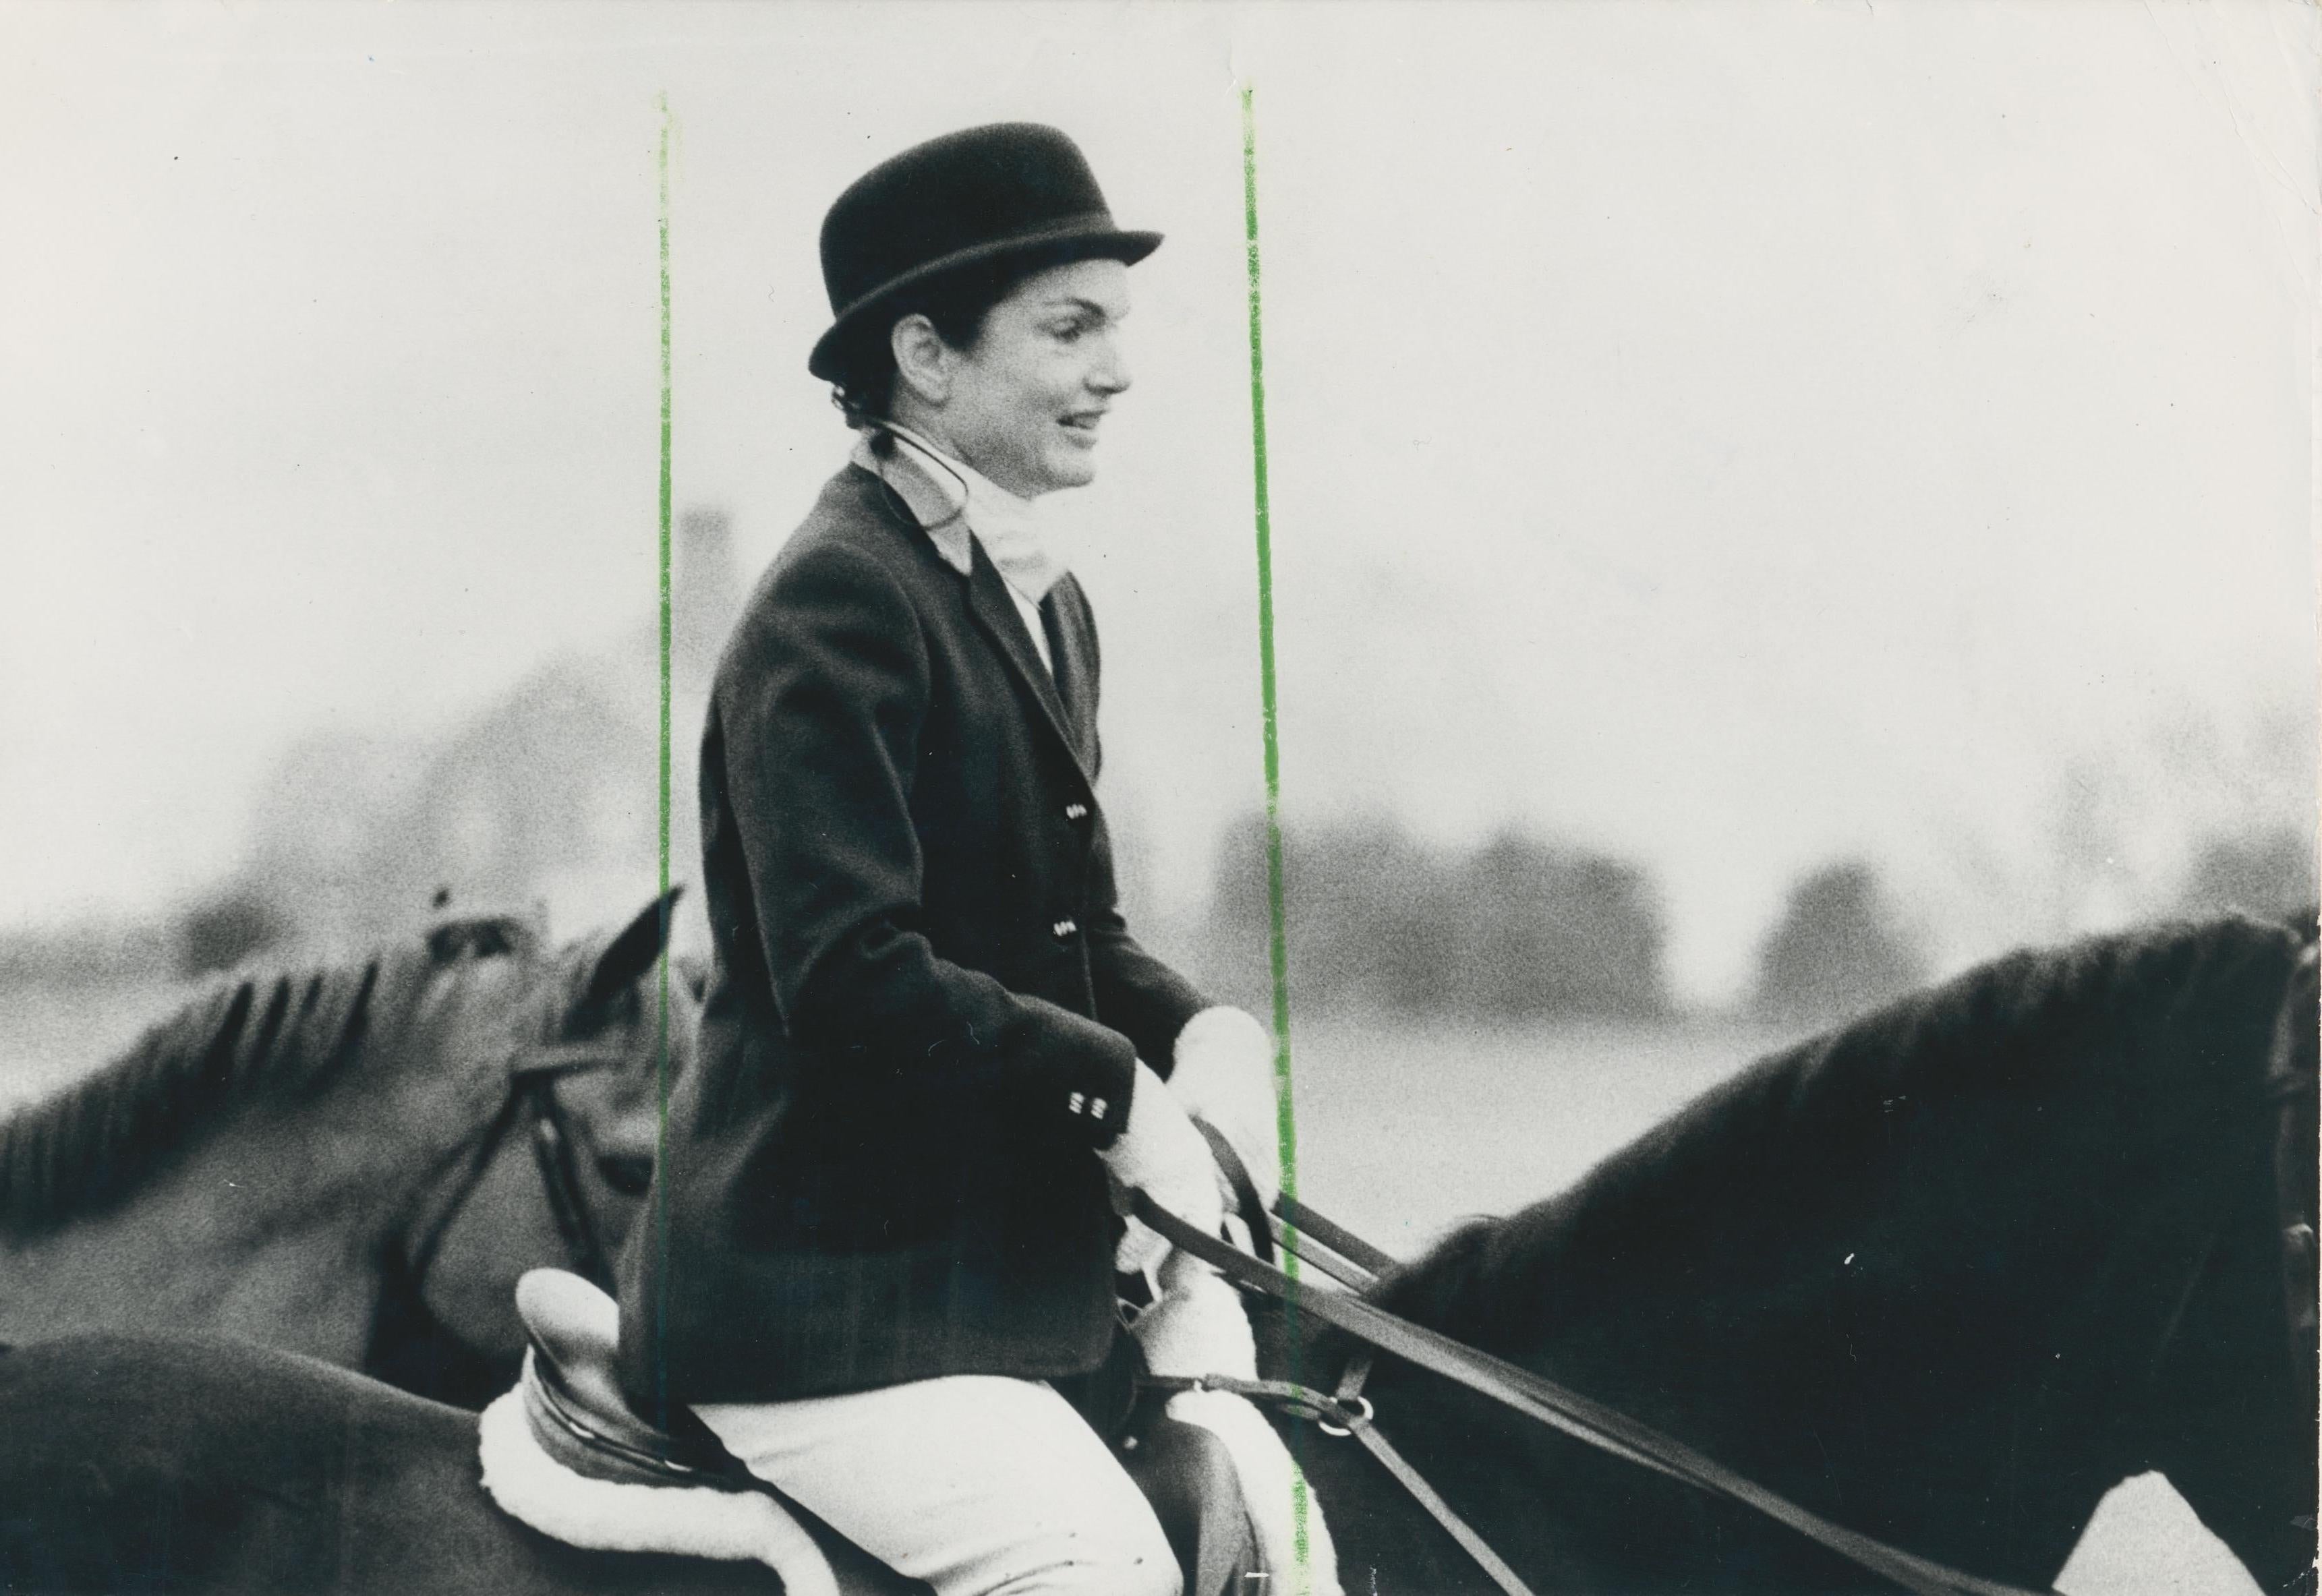 Jackie Kennedy; horse-riding, ca. 1970s